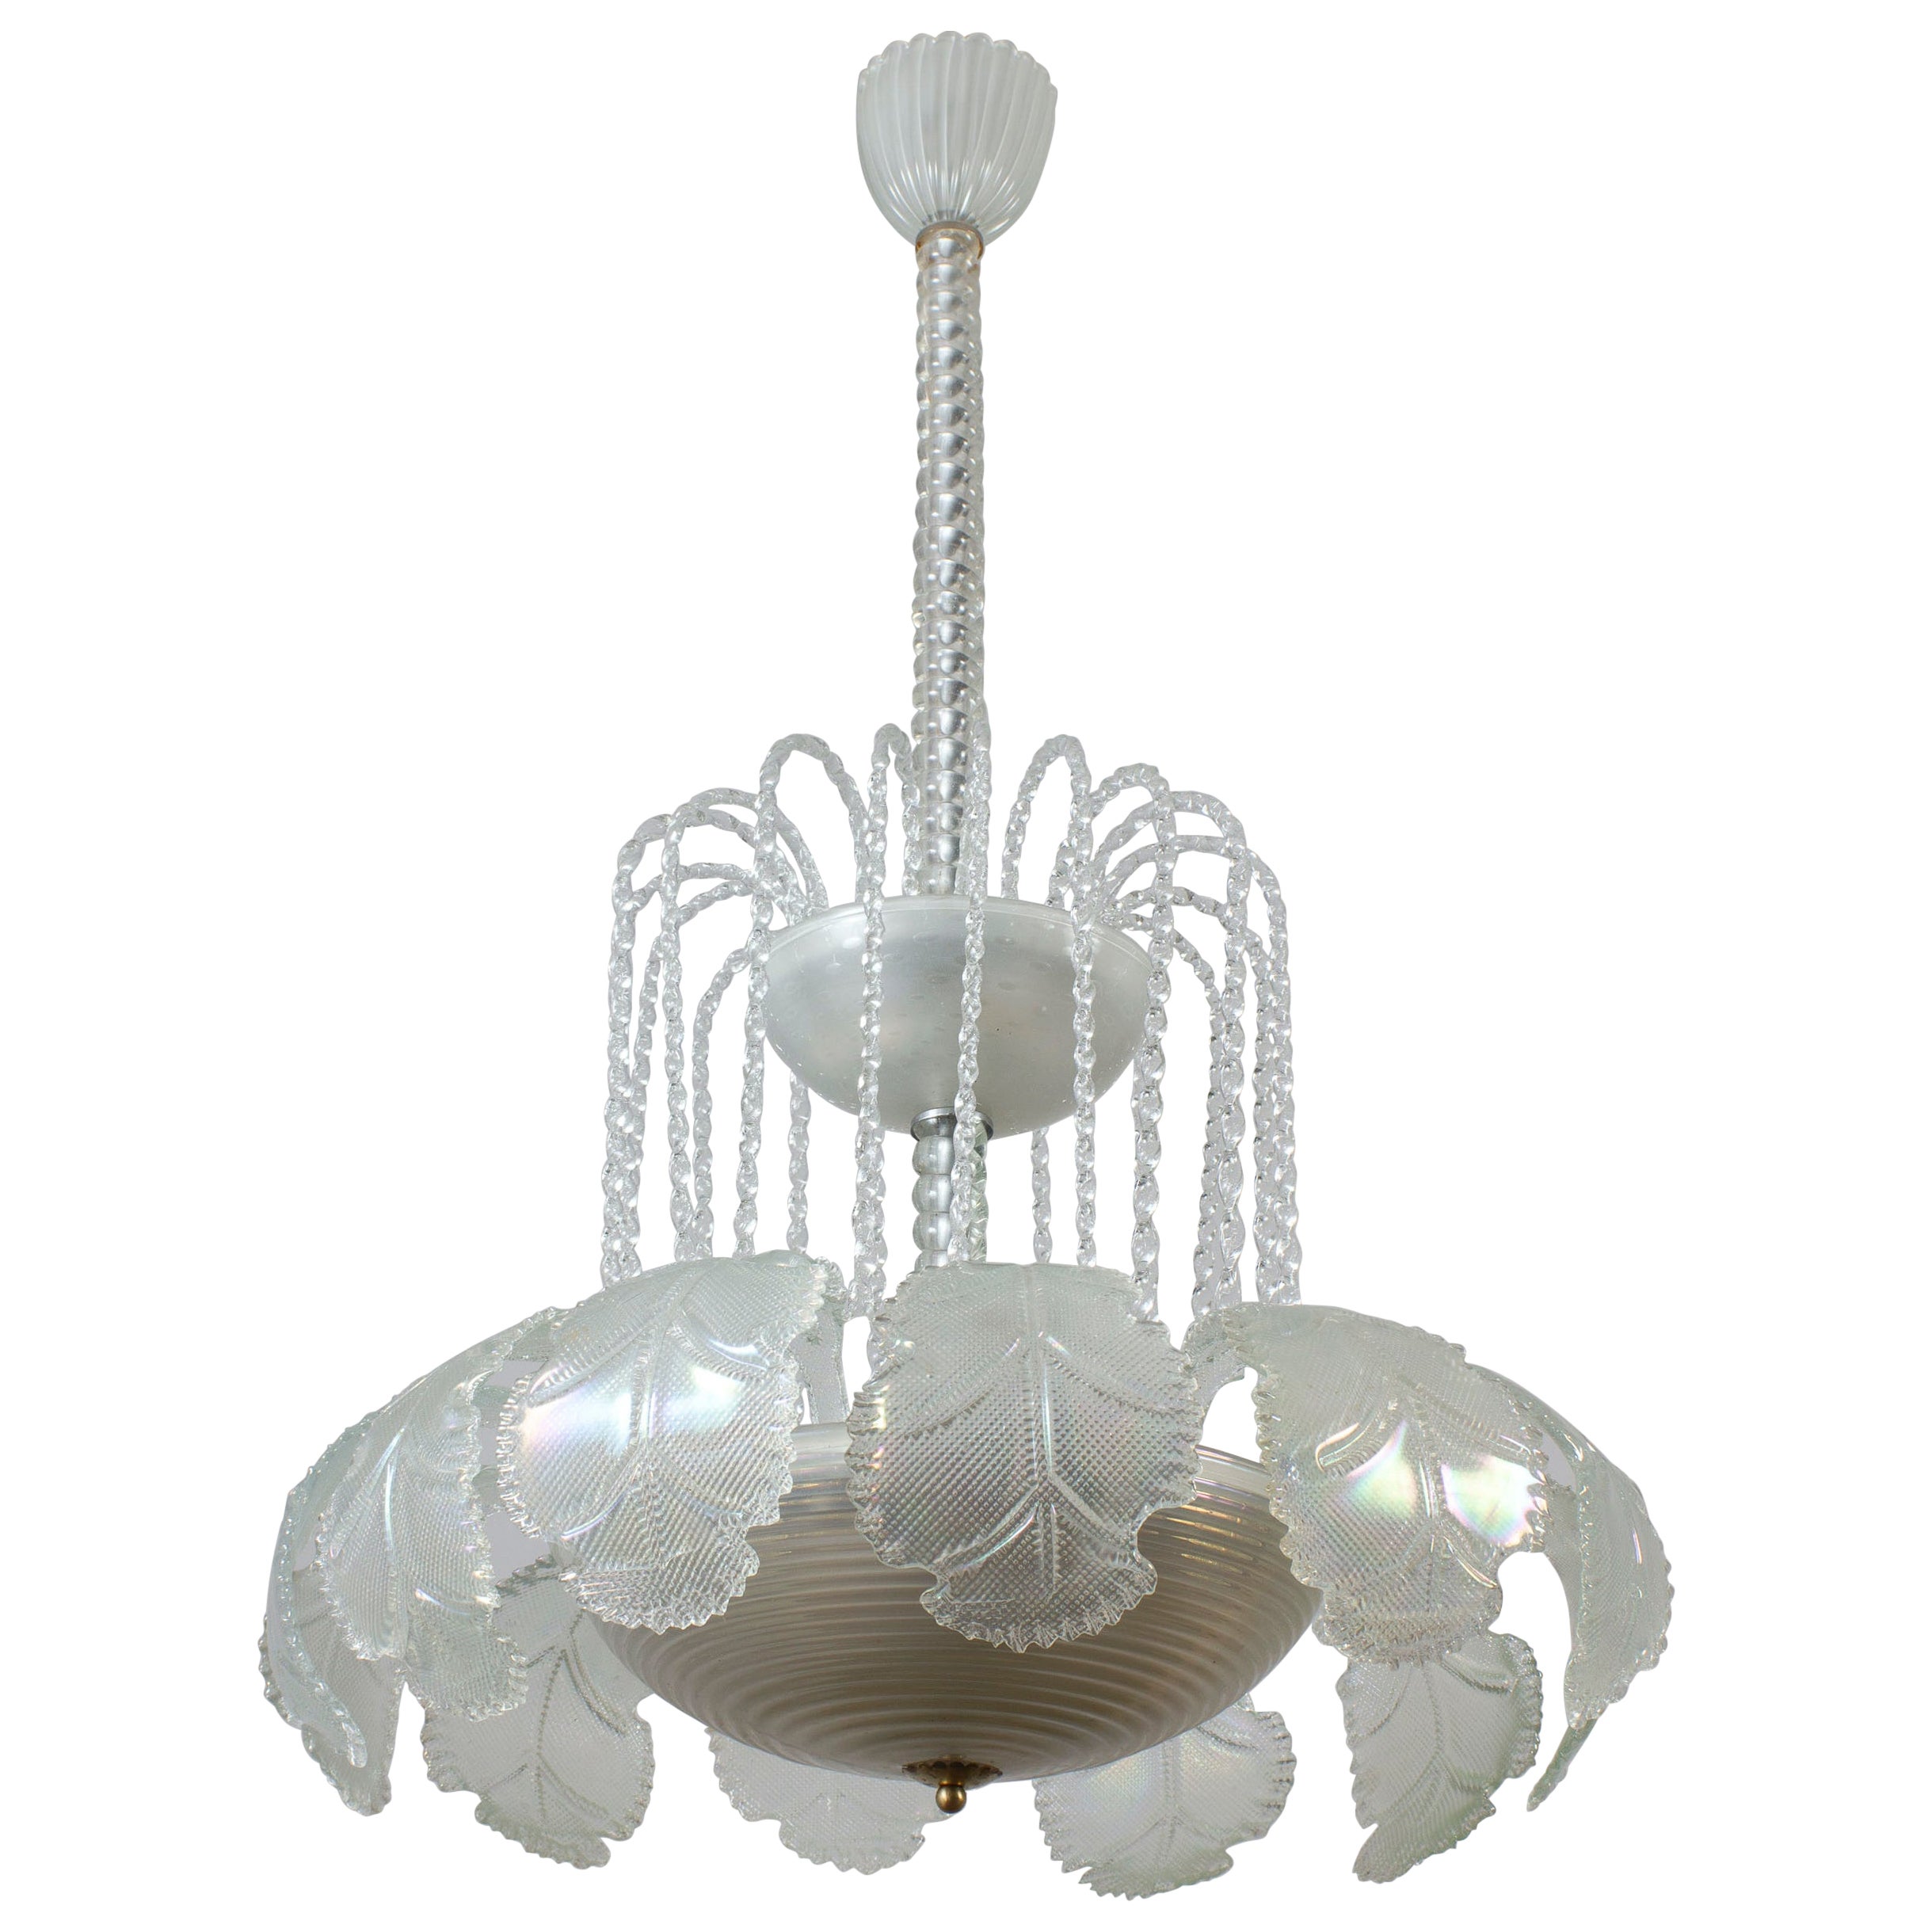 Superb Art Deco Ninfea Murano Glass Chandelier by Barovier Italy, 1940